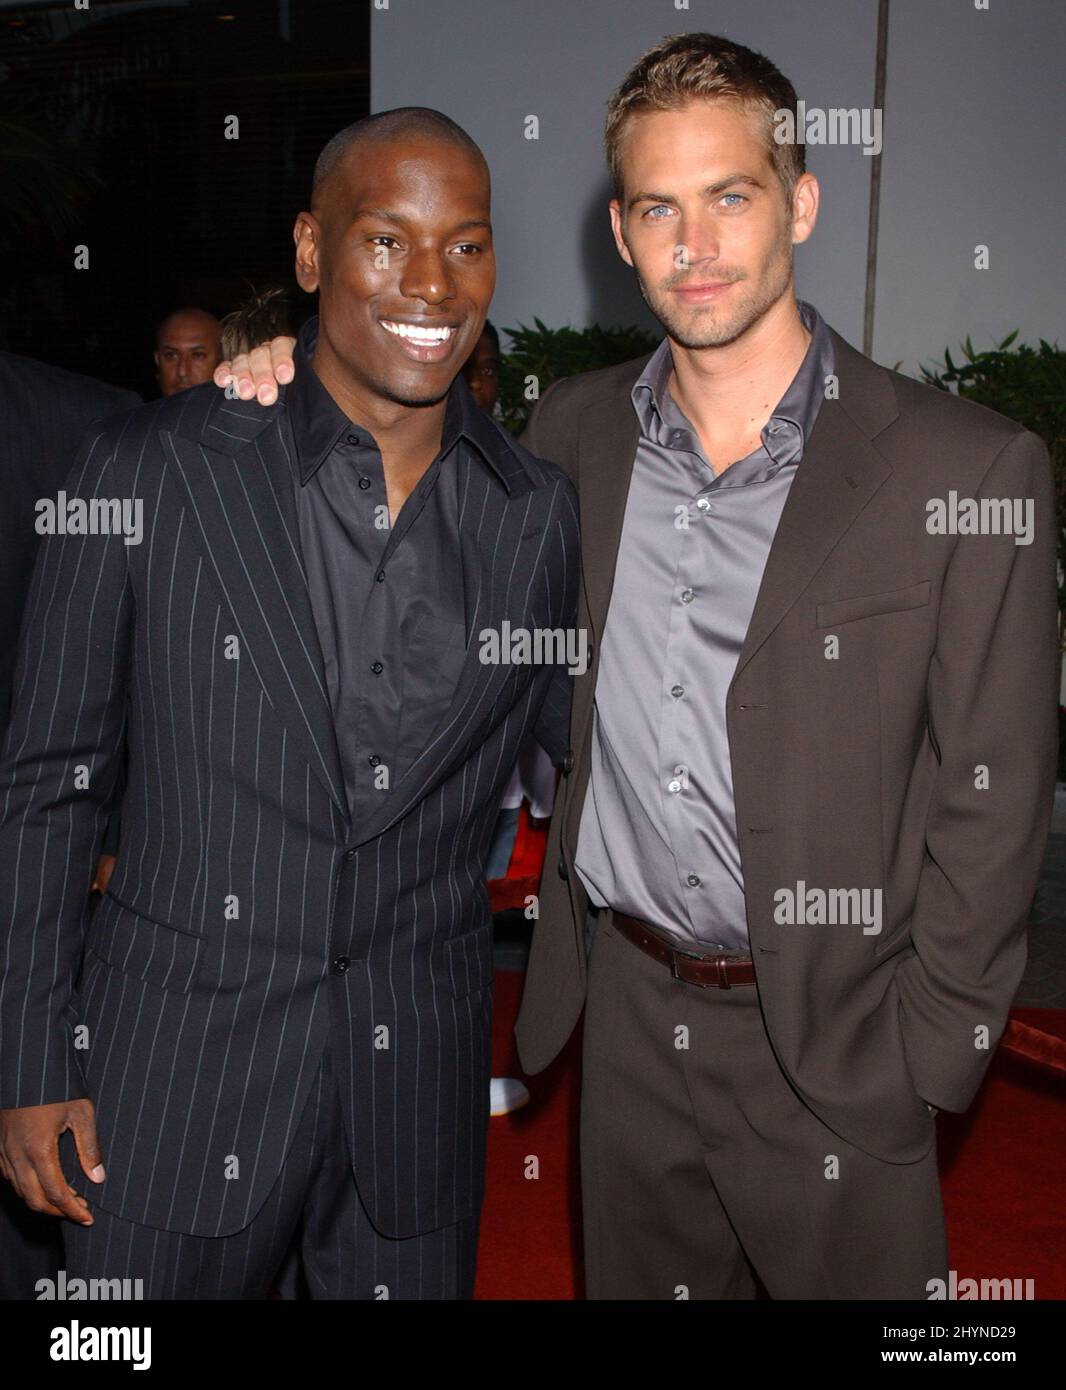 PAUL WALKER & TYRESE ATTEND THE '2 FAST 2 FURIOUS' FILM PREMIERE IN HOLLYWOOD PICTURE: UK PRESS Stock Photo